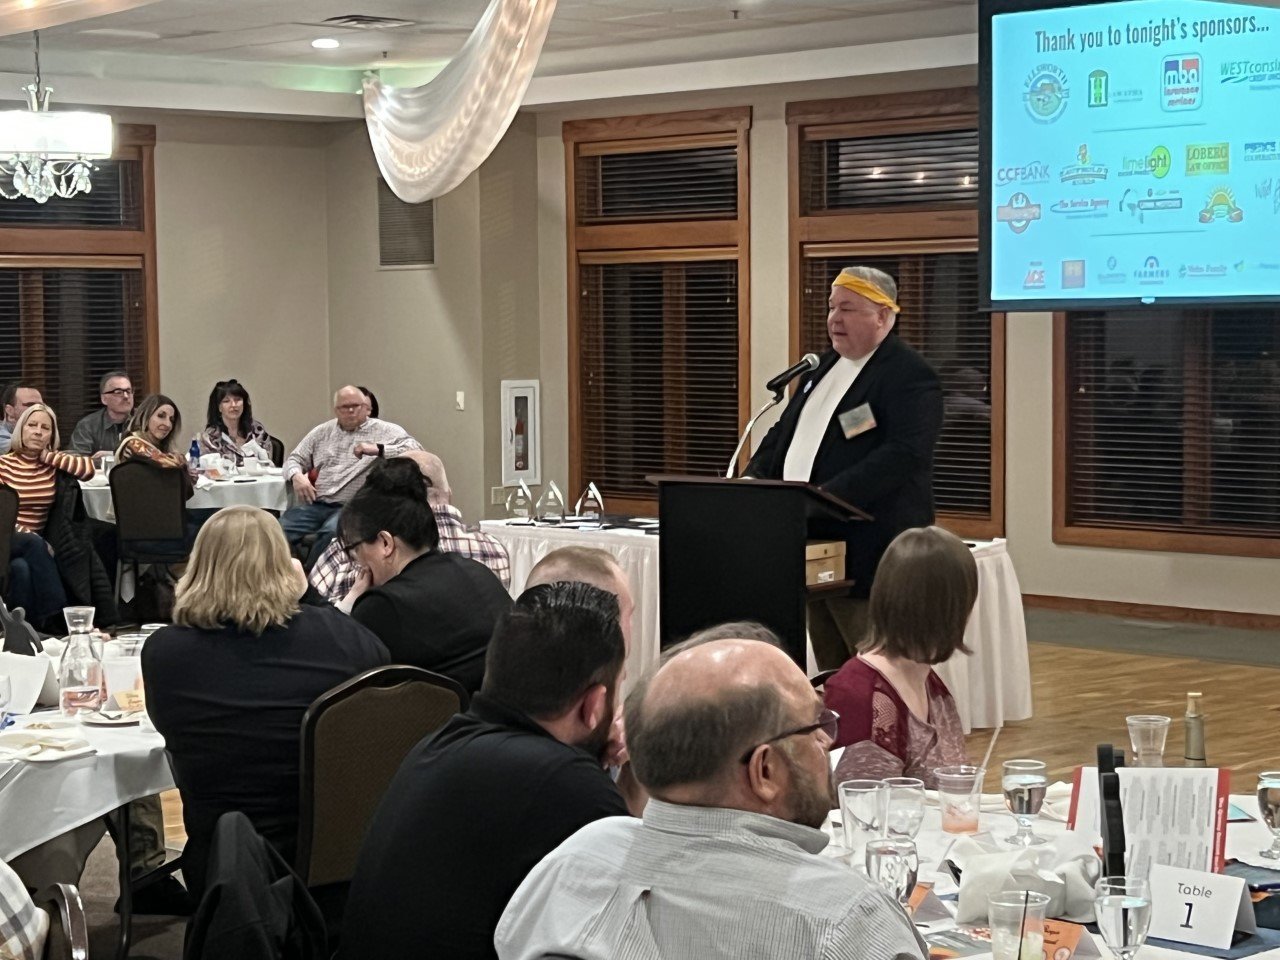 Ellsworth Area Chamber of Commerce President Paul Bauer was in the spirit for the “Time to Boogie” themed award banquet Monday, Feb. 20 at Kilkarney Hills in River Falls.